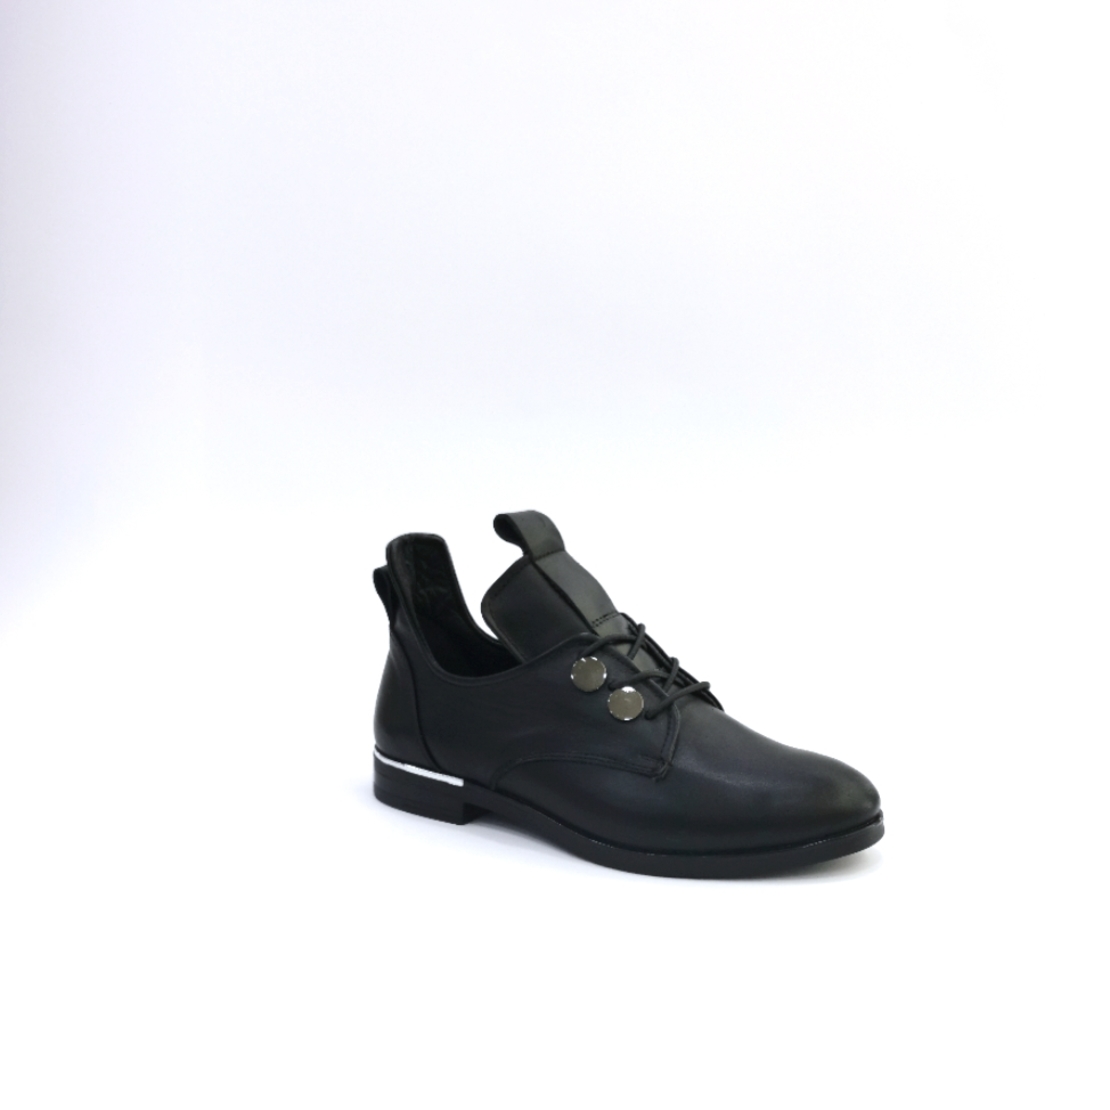 Women's casual shoes made of natural leather with anatomical insole in black/7052